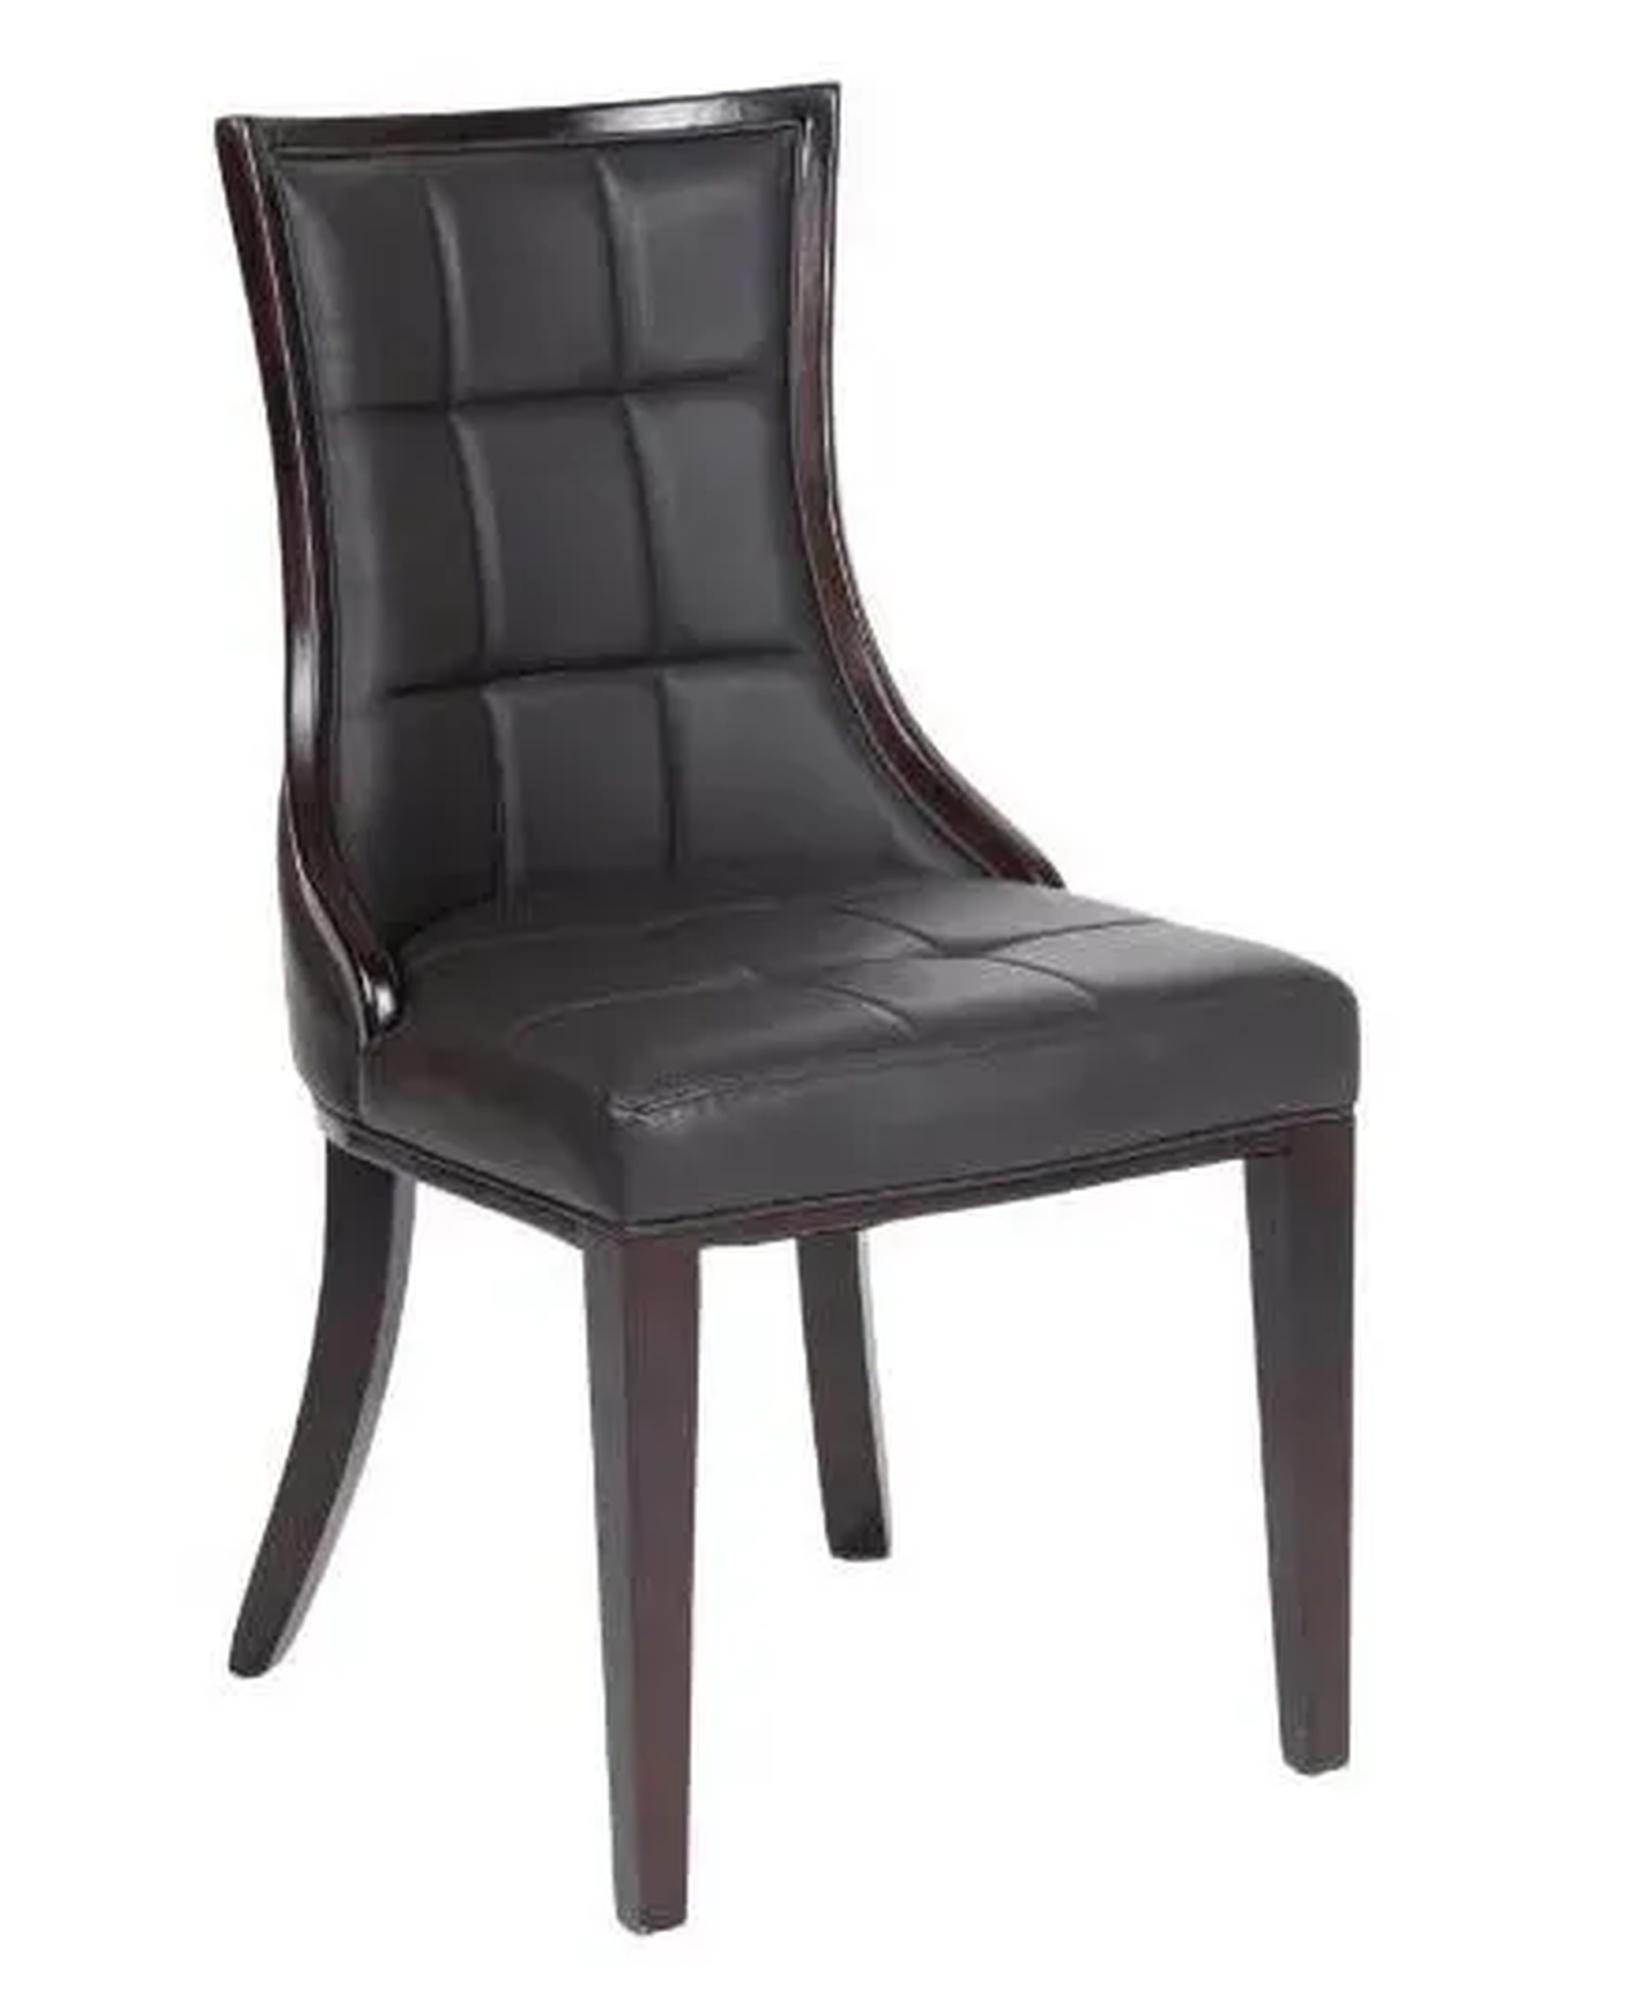 Paris Brown Dining Chair, Leather - Faux PU with Brown Legs and High Gloss Side Trims